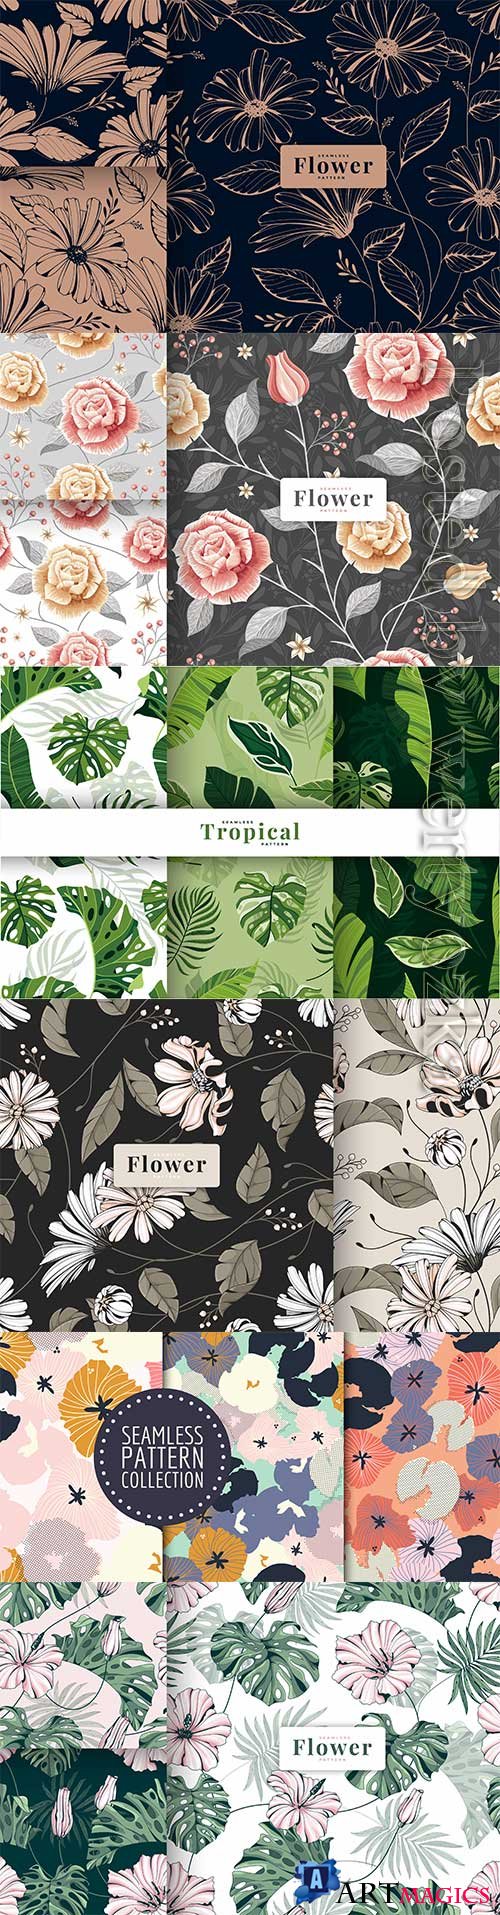 Collection hand drawn vintage floral seamless pattern